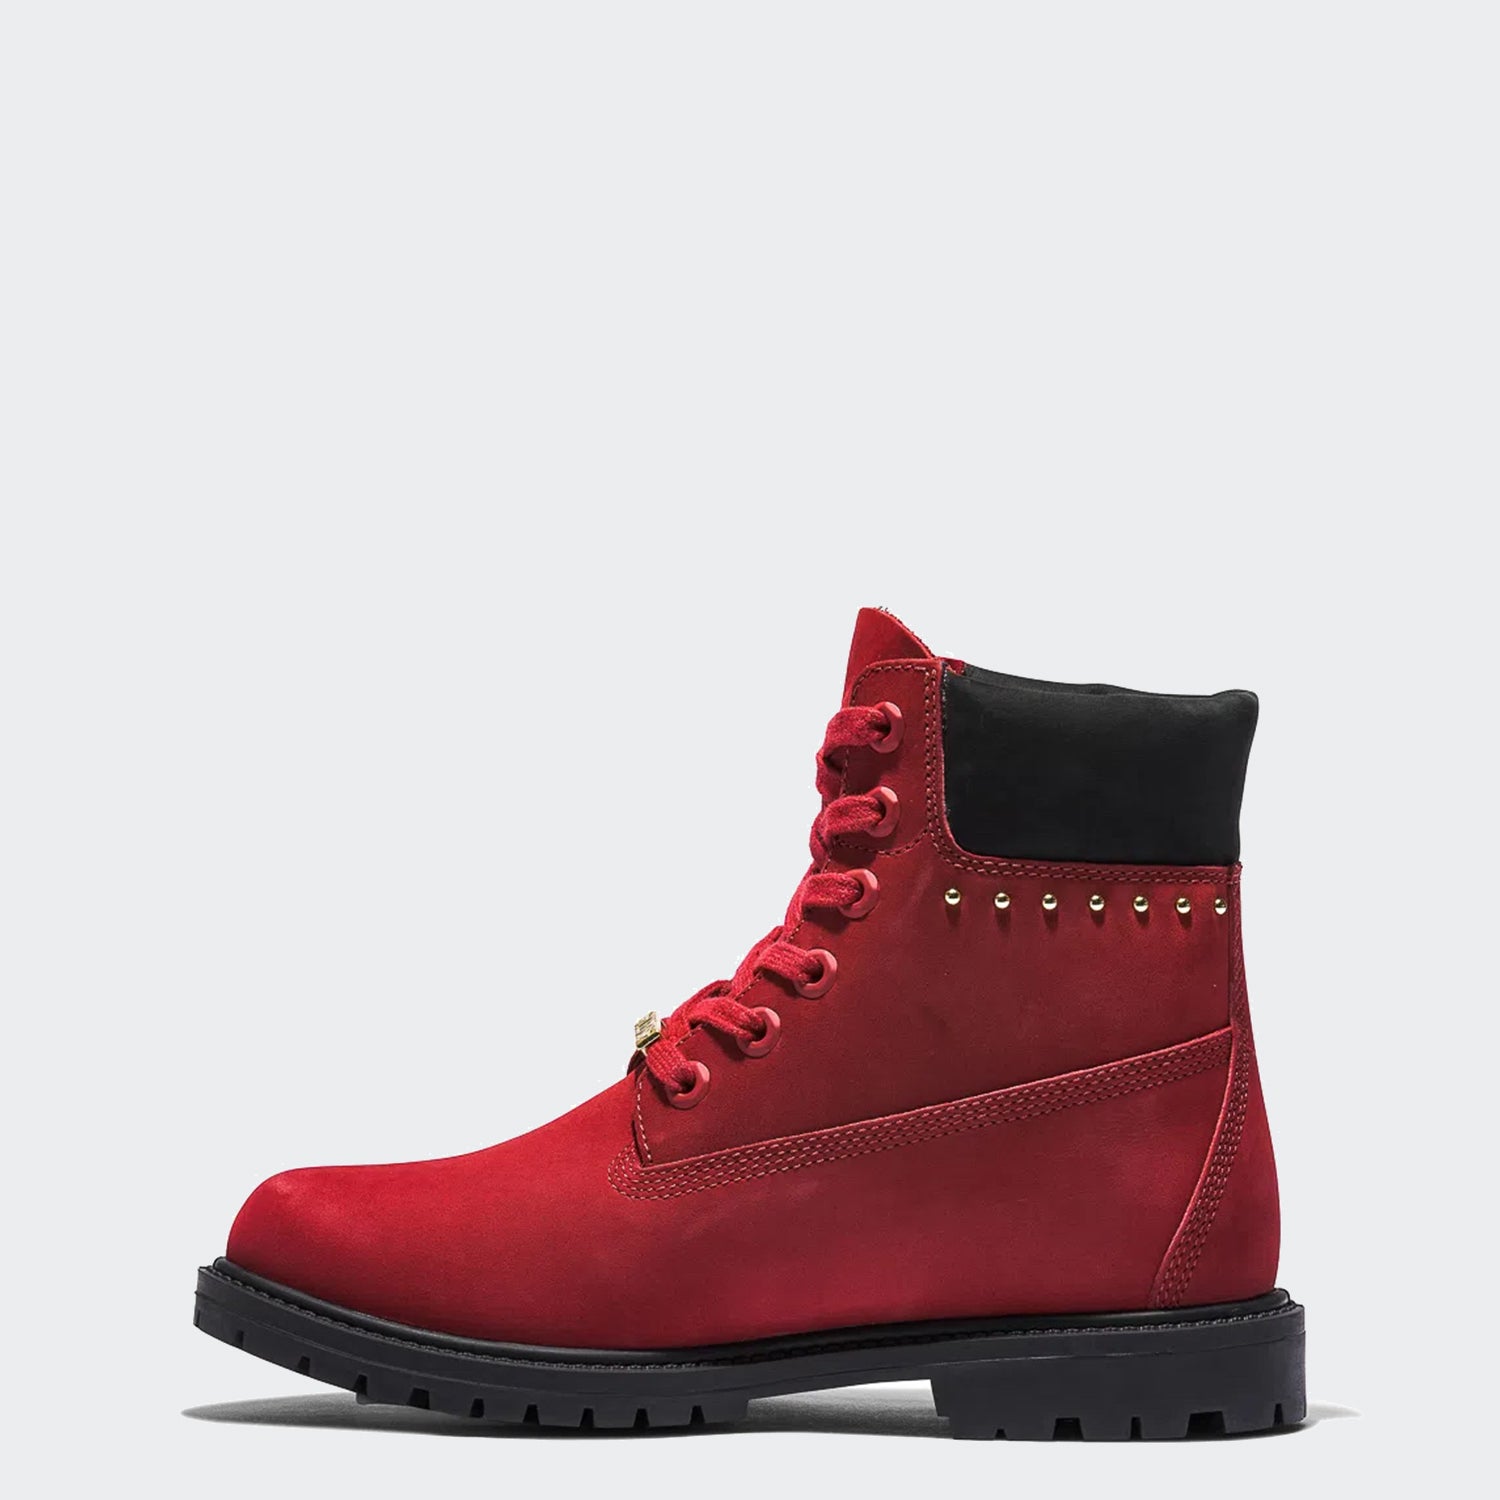 Monica Rejse optager Women's Timberland 6-Inch Waterproof Boots Red | Chicago City Sports